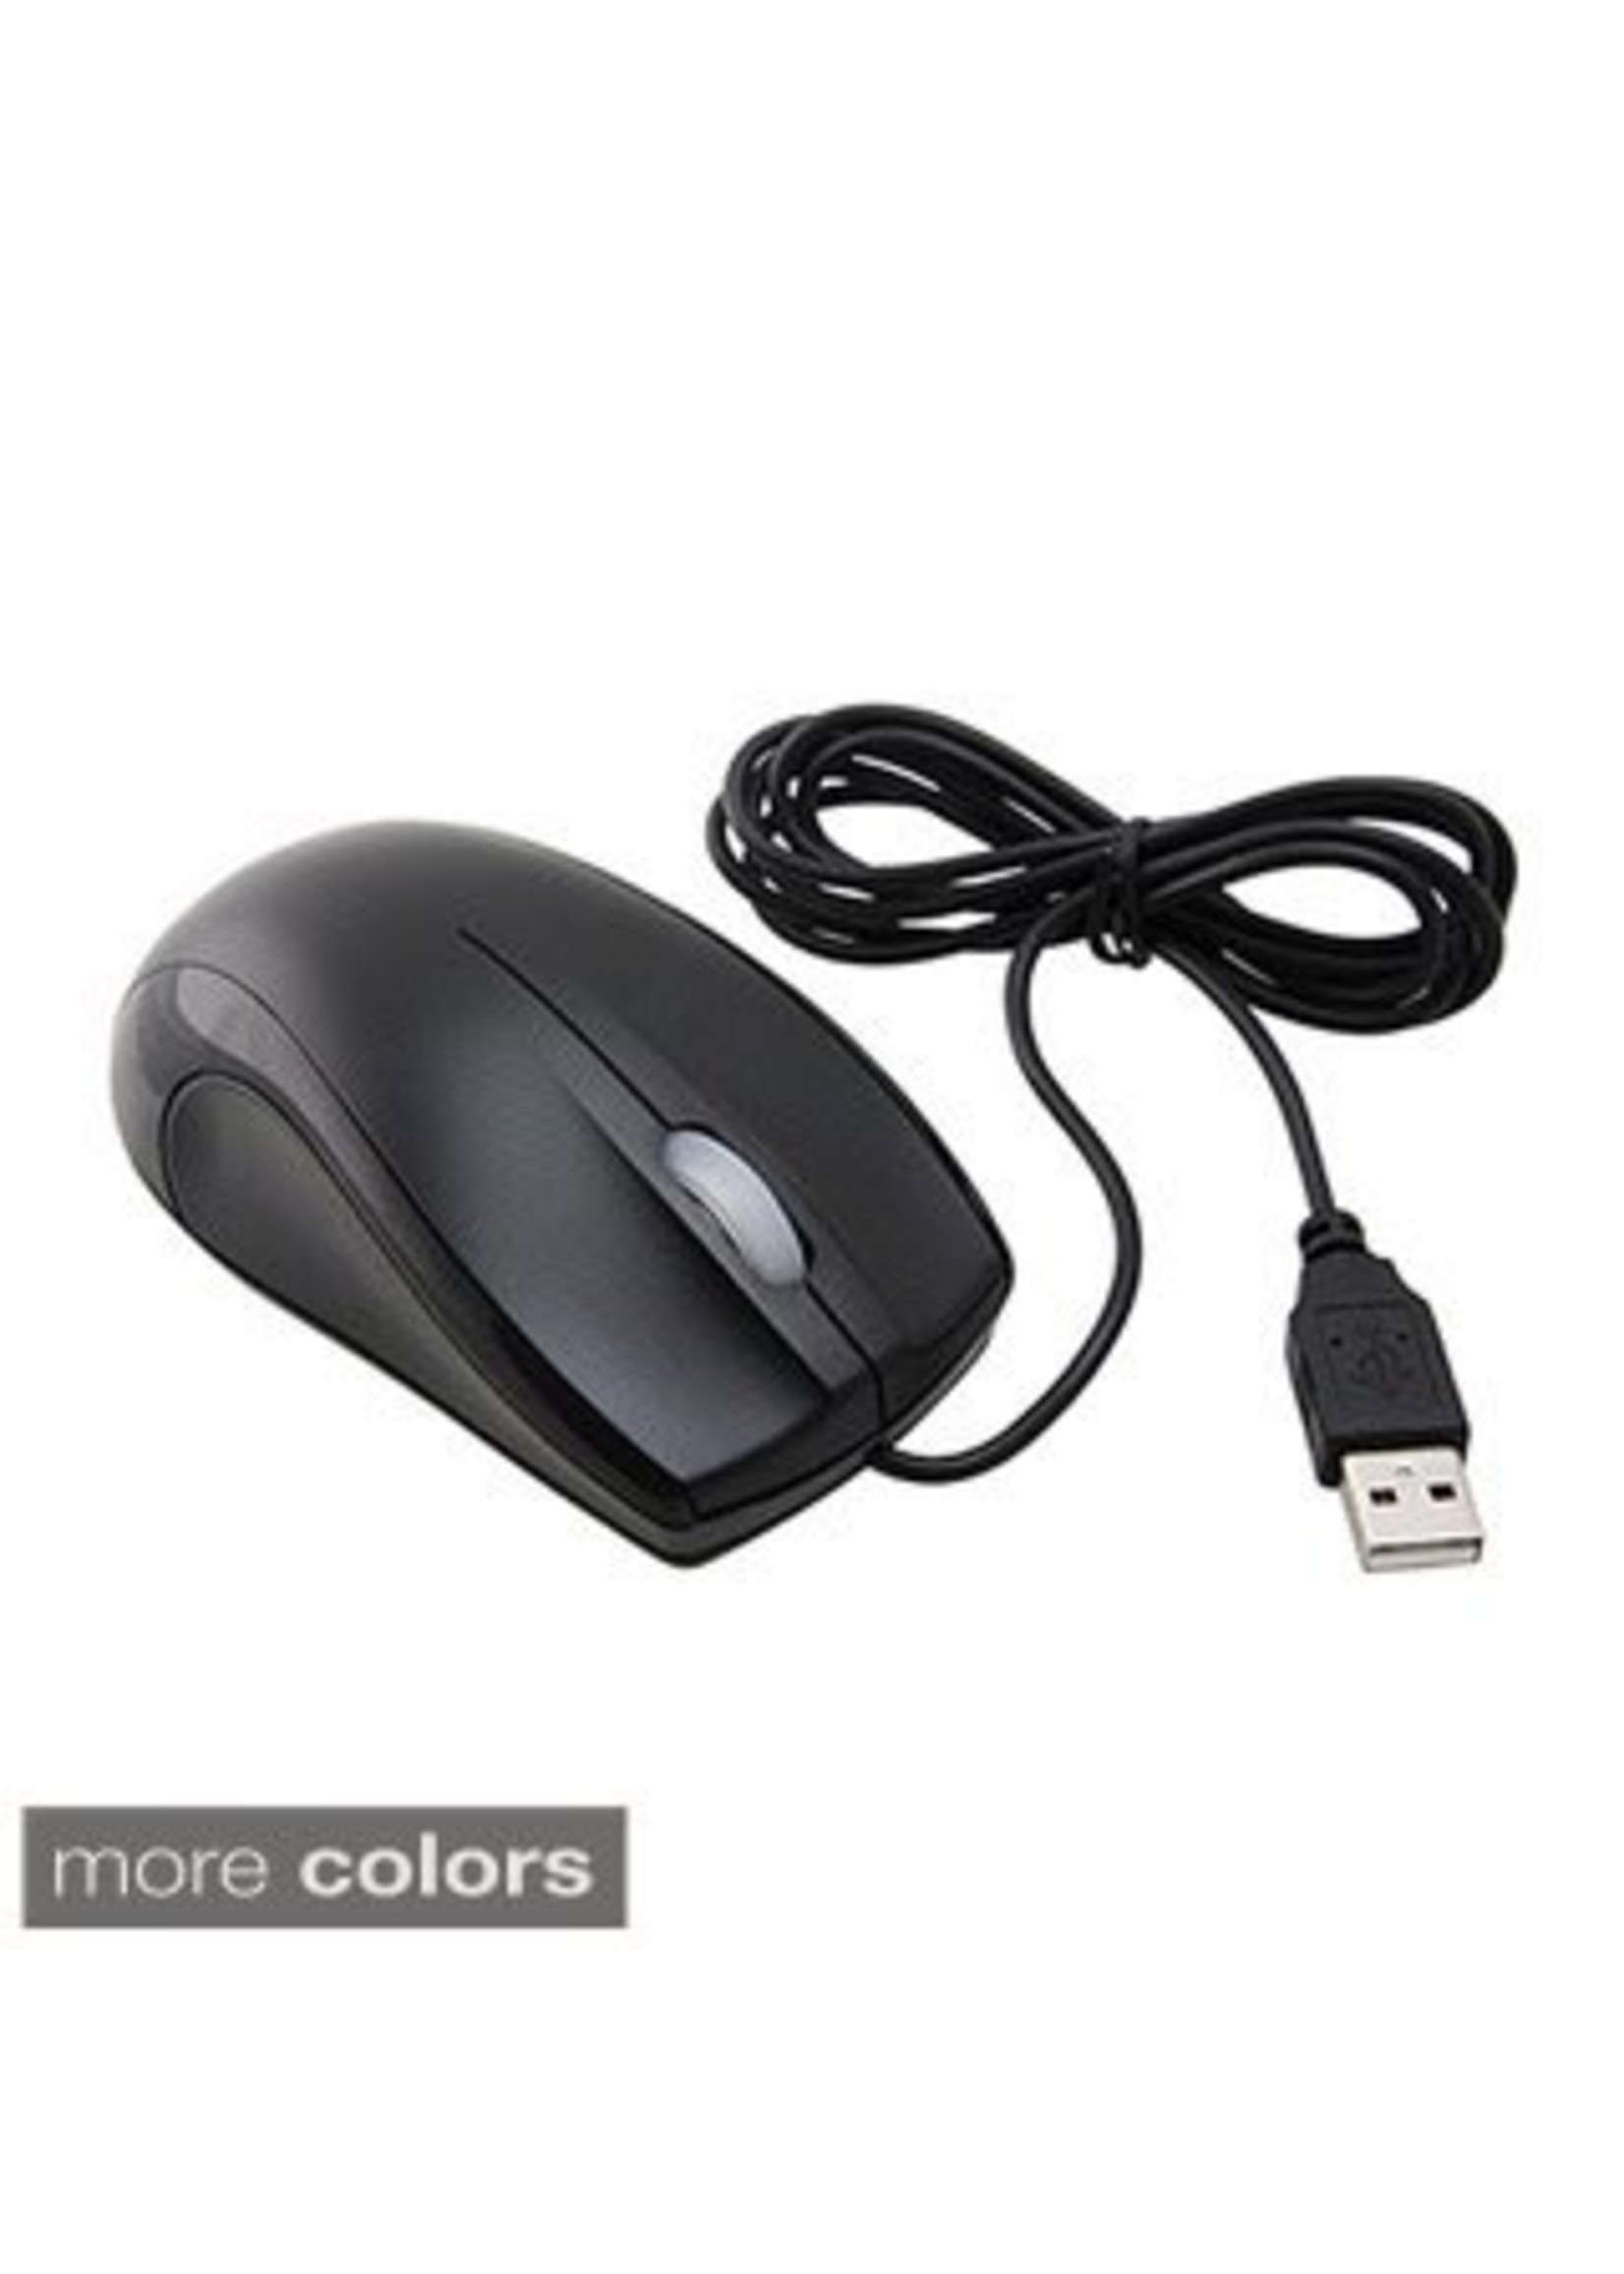 Mouse Optical USB only